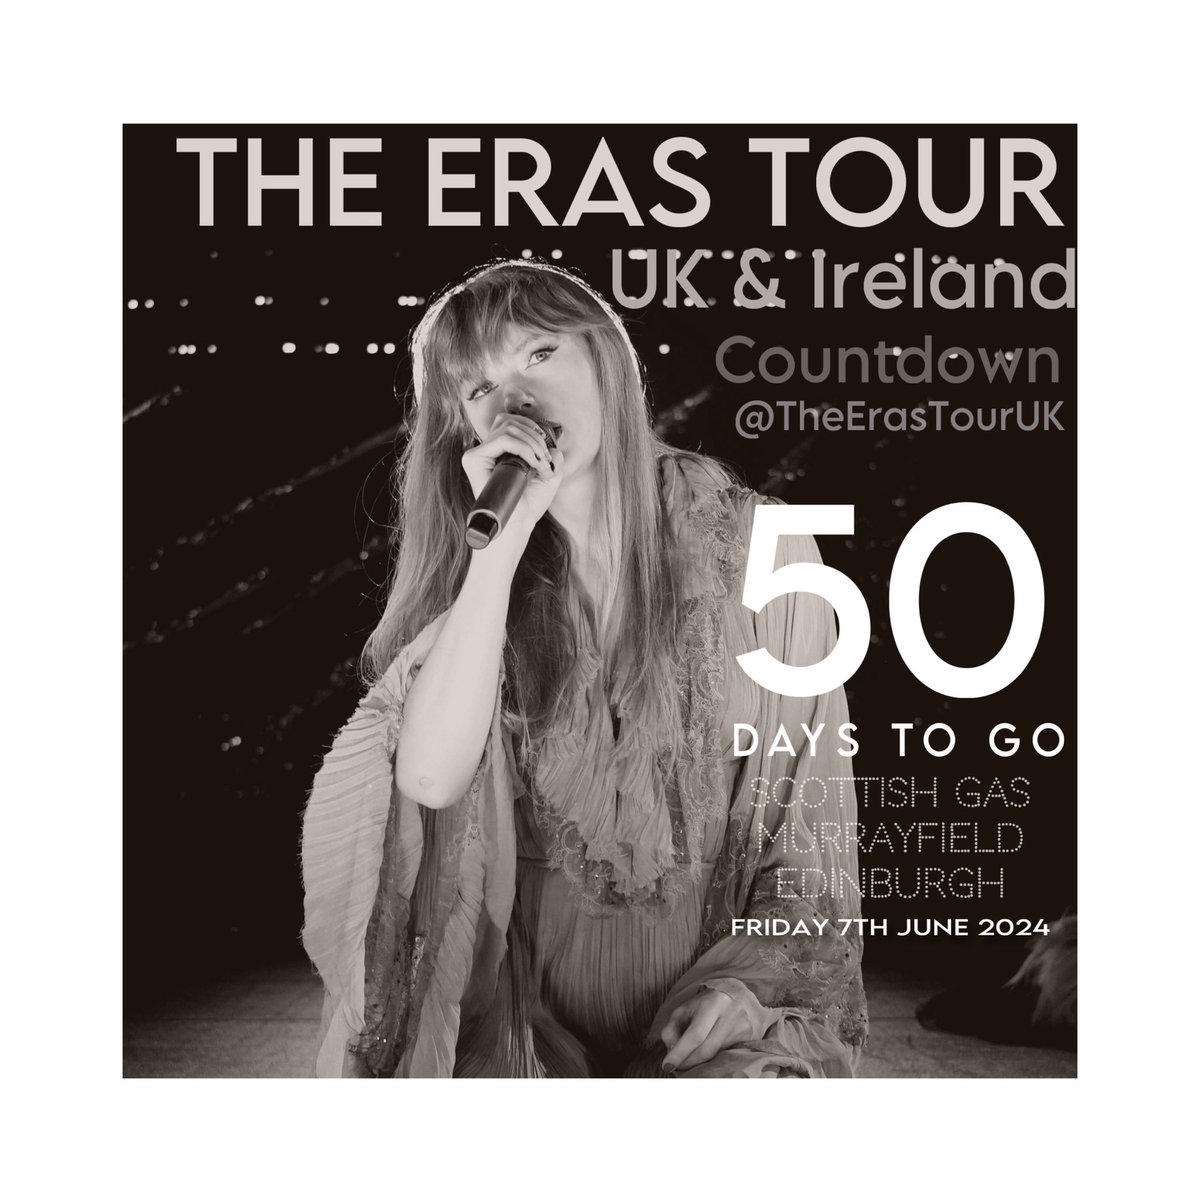 📆 Only 50 days until @taylorswift13 kicks off the UK leg of the Eras Tour with shows at Murrayfield, Edinburgh! Make sure to stream Taylor’s new album, the Tortured Poets Department from 5AM BST tomorrow! 🤍 📸 sourced from @4k_taylorr